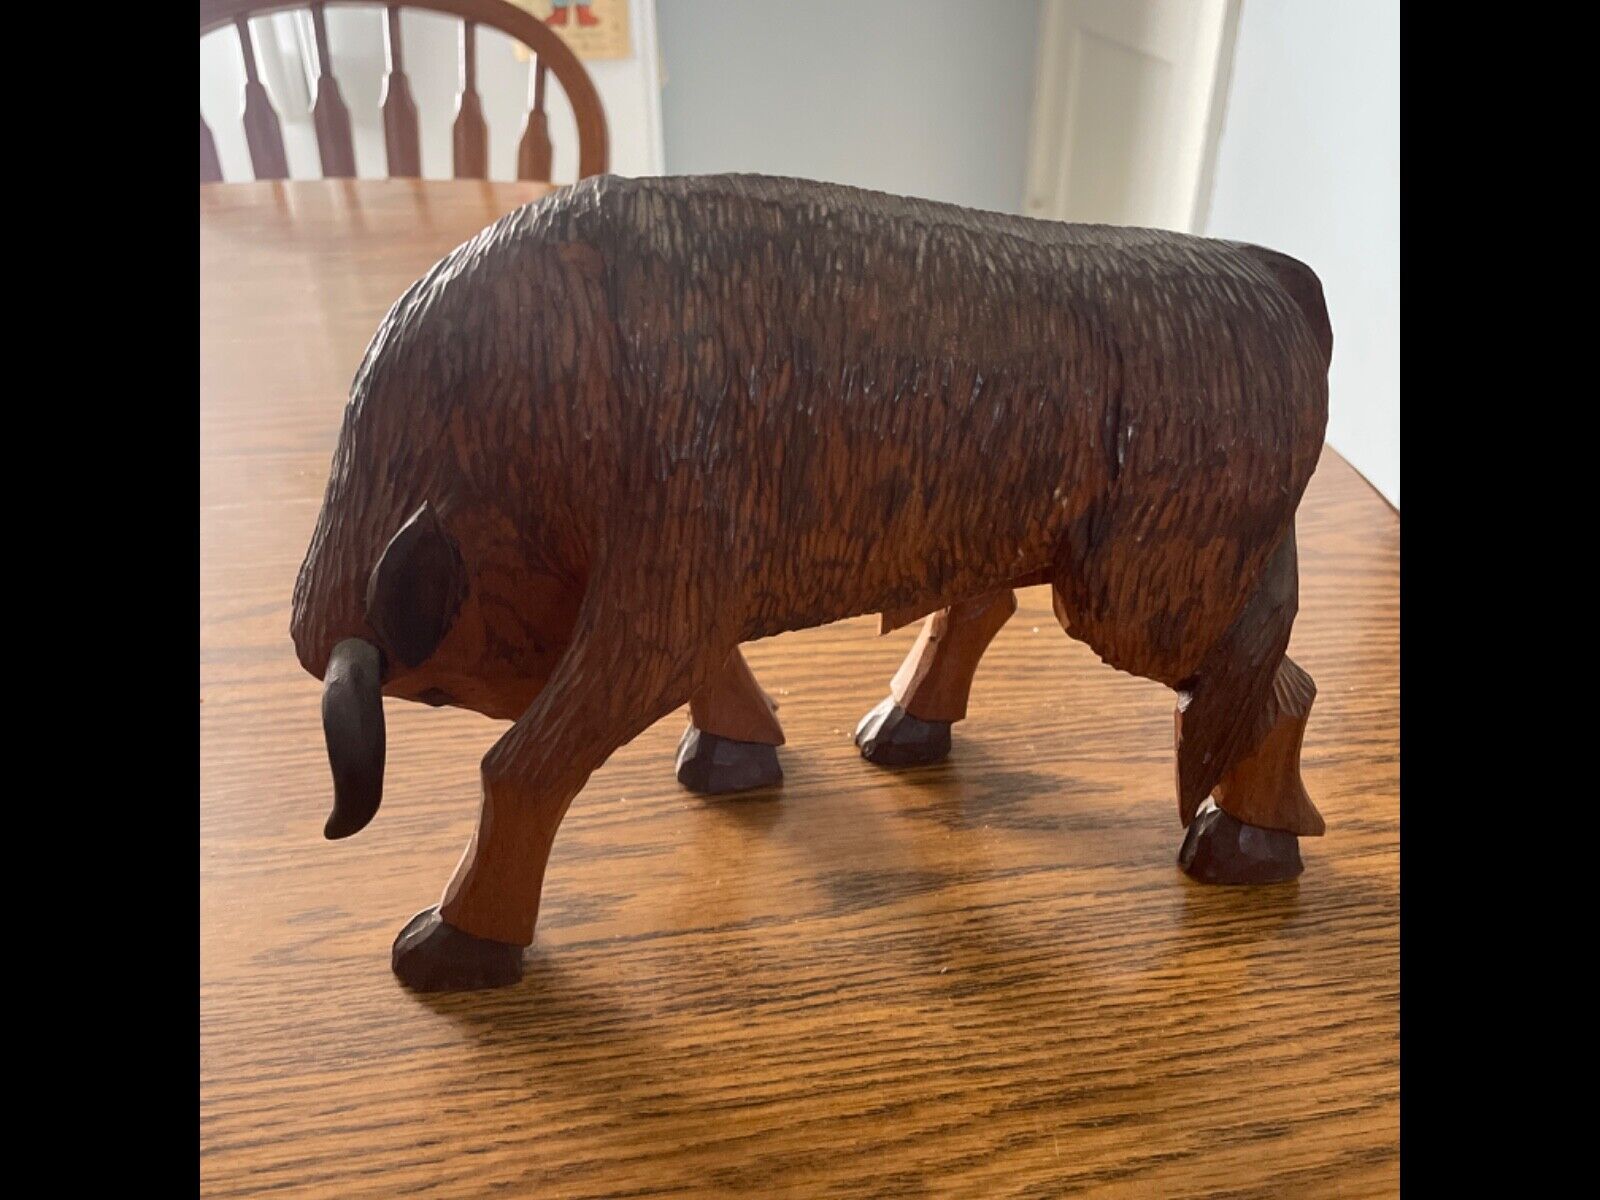 OVERSIZE Wood  Bull Carving Handmade PREMIUM HIGHEST QUALITY VERY GENTLY USED